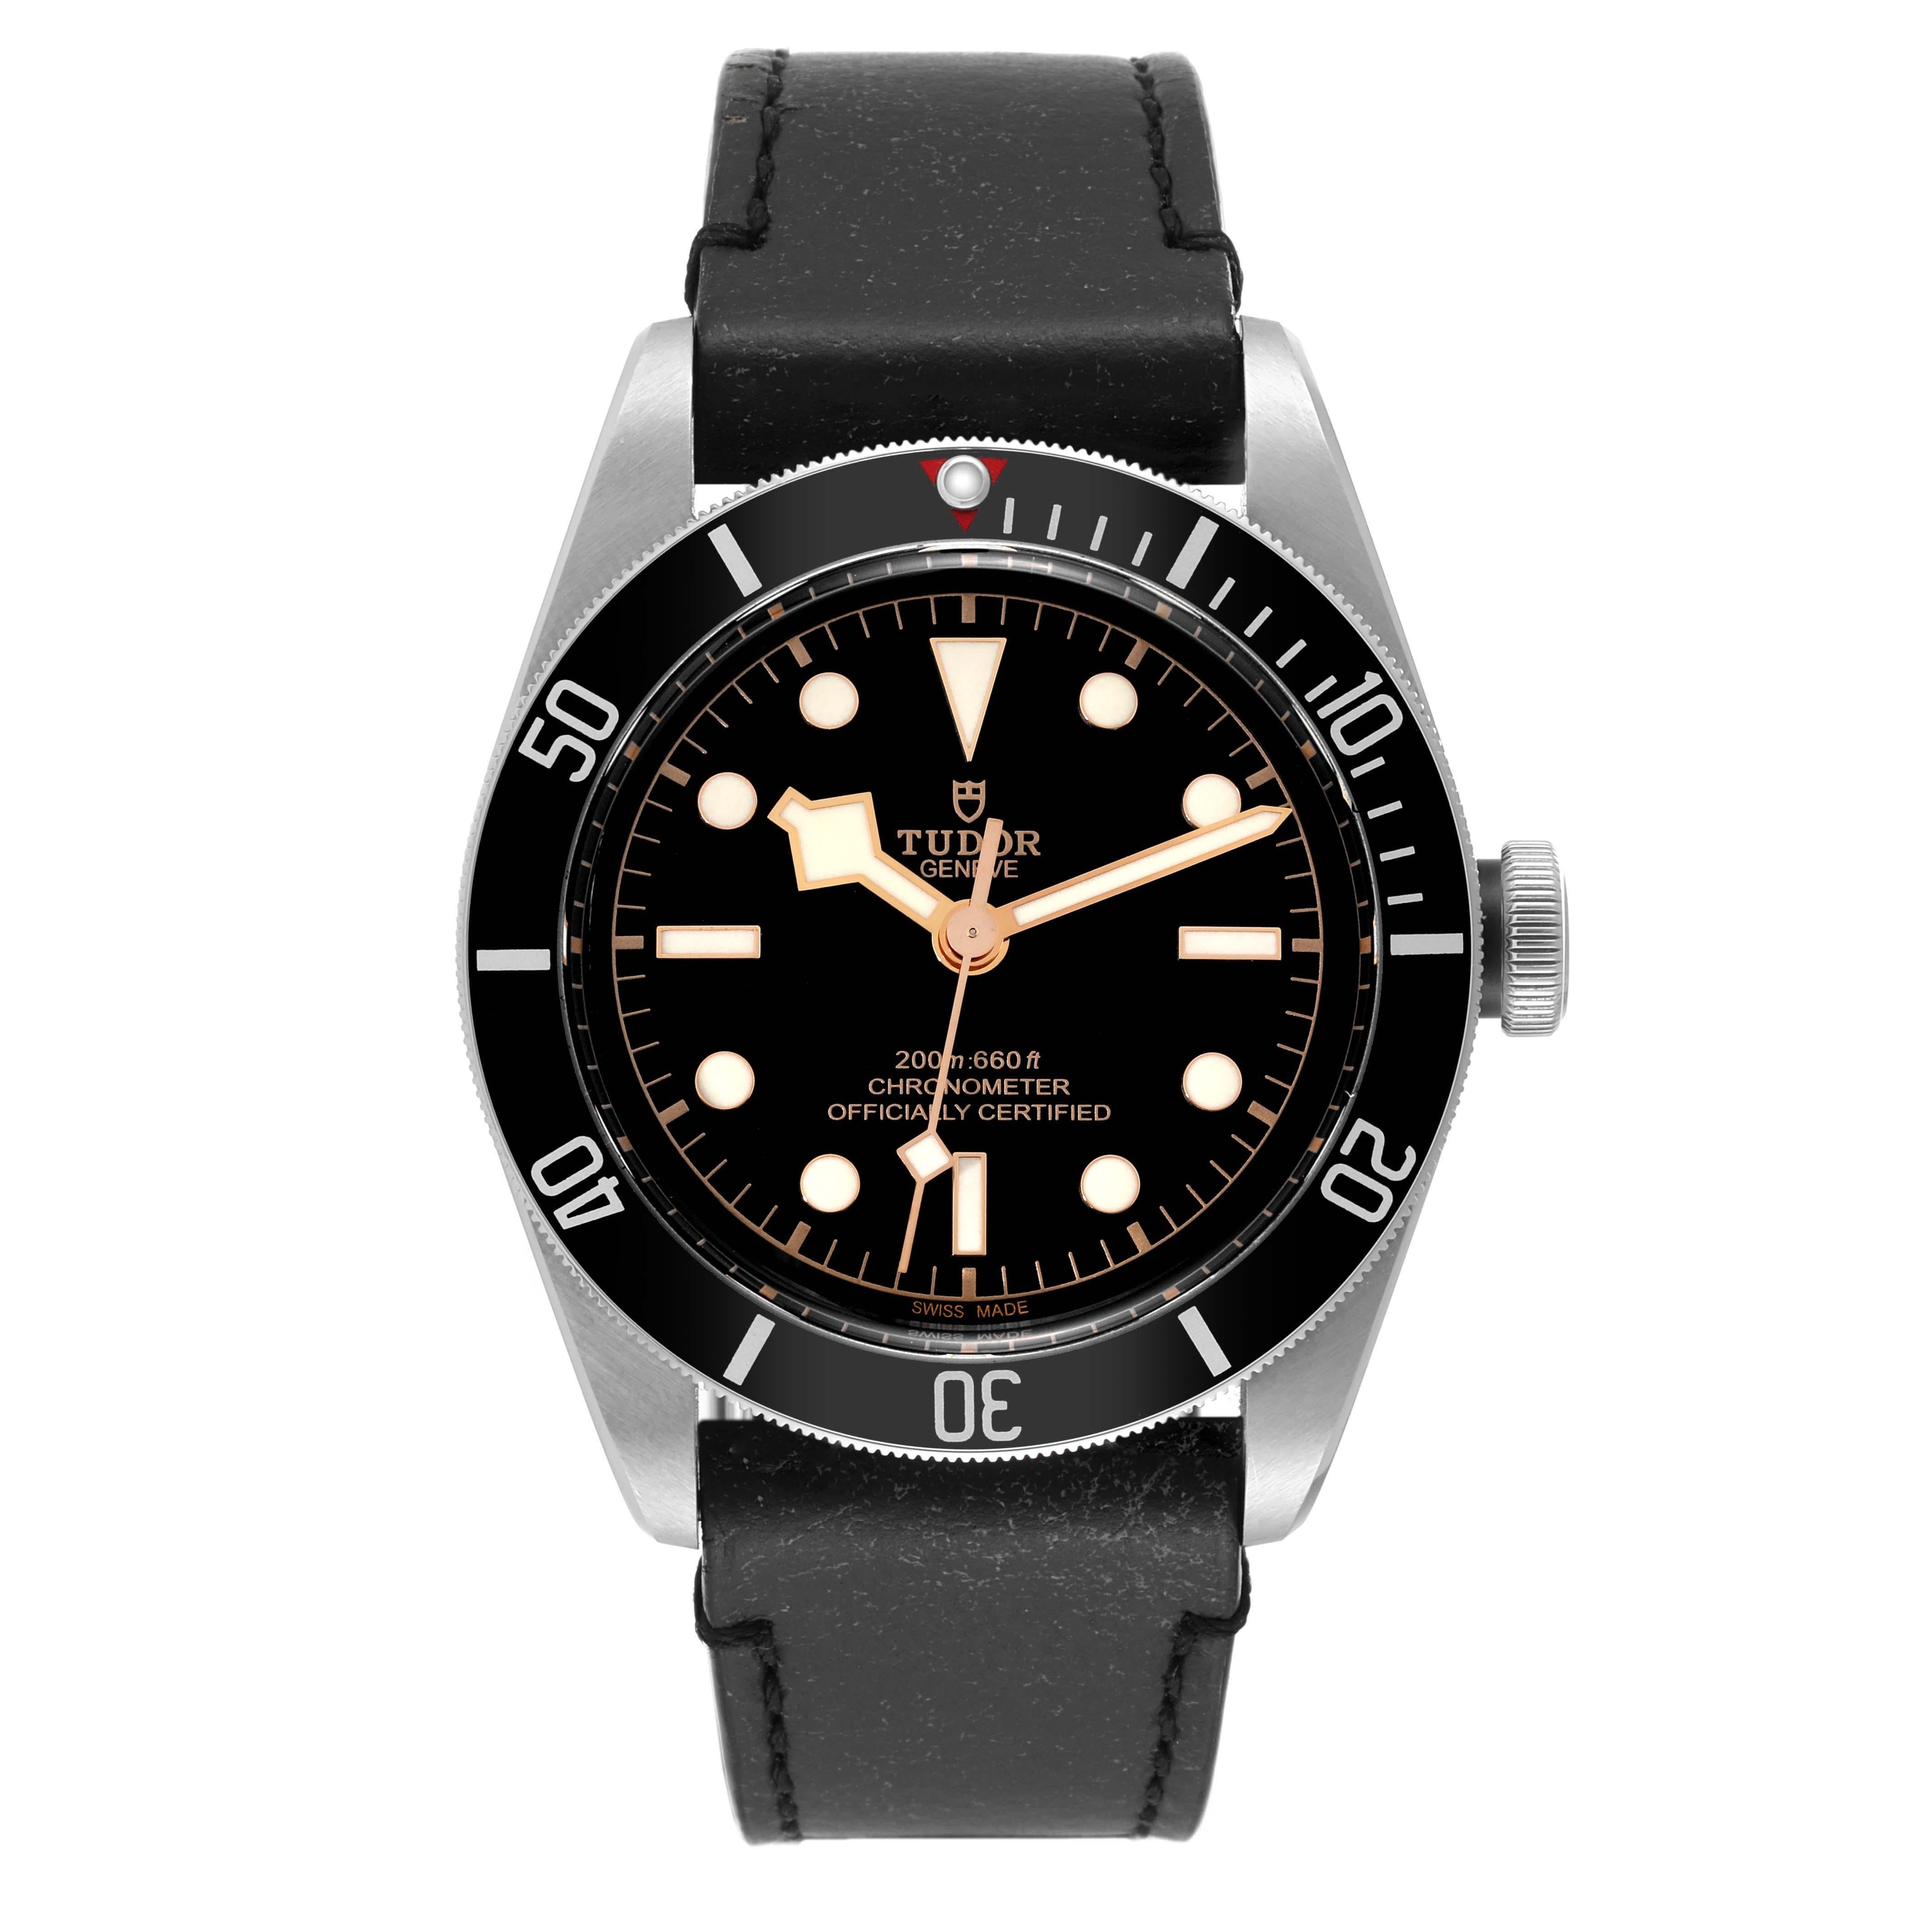 Tudor Heritage Black Bay Leather Strap Steel Mens Watch 79230 Box Card. Automatic self-winding movement. Stainless steel oyster case 41.0 mm in diameter. Tudor logo on a crown. Unidirectional rotating stainless steel bezel with black insert. Scratch